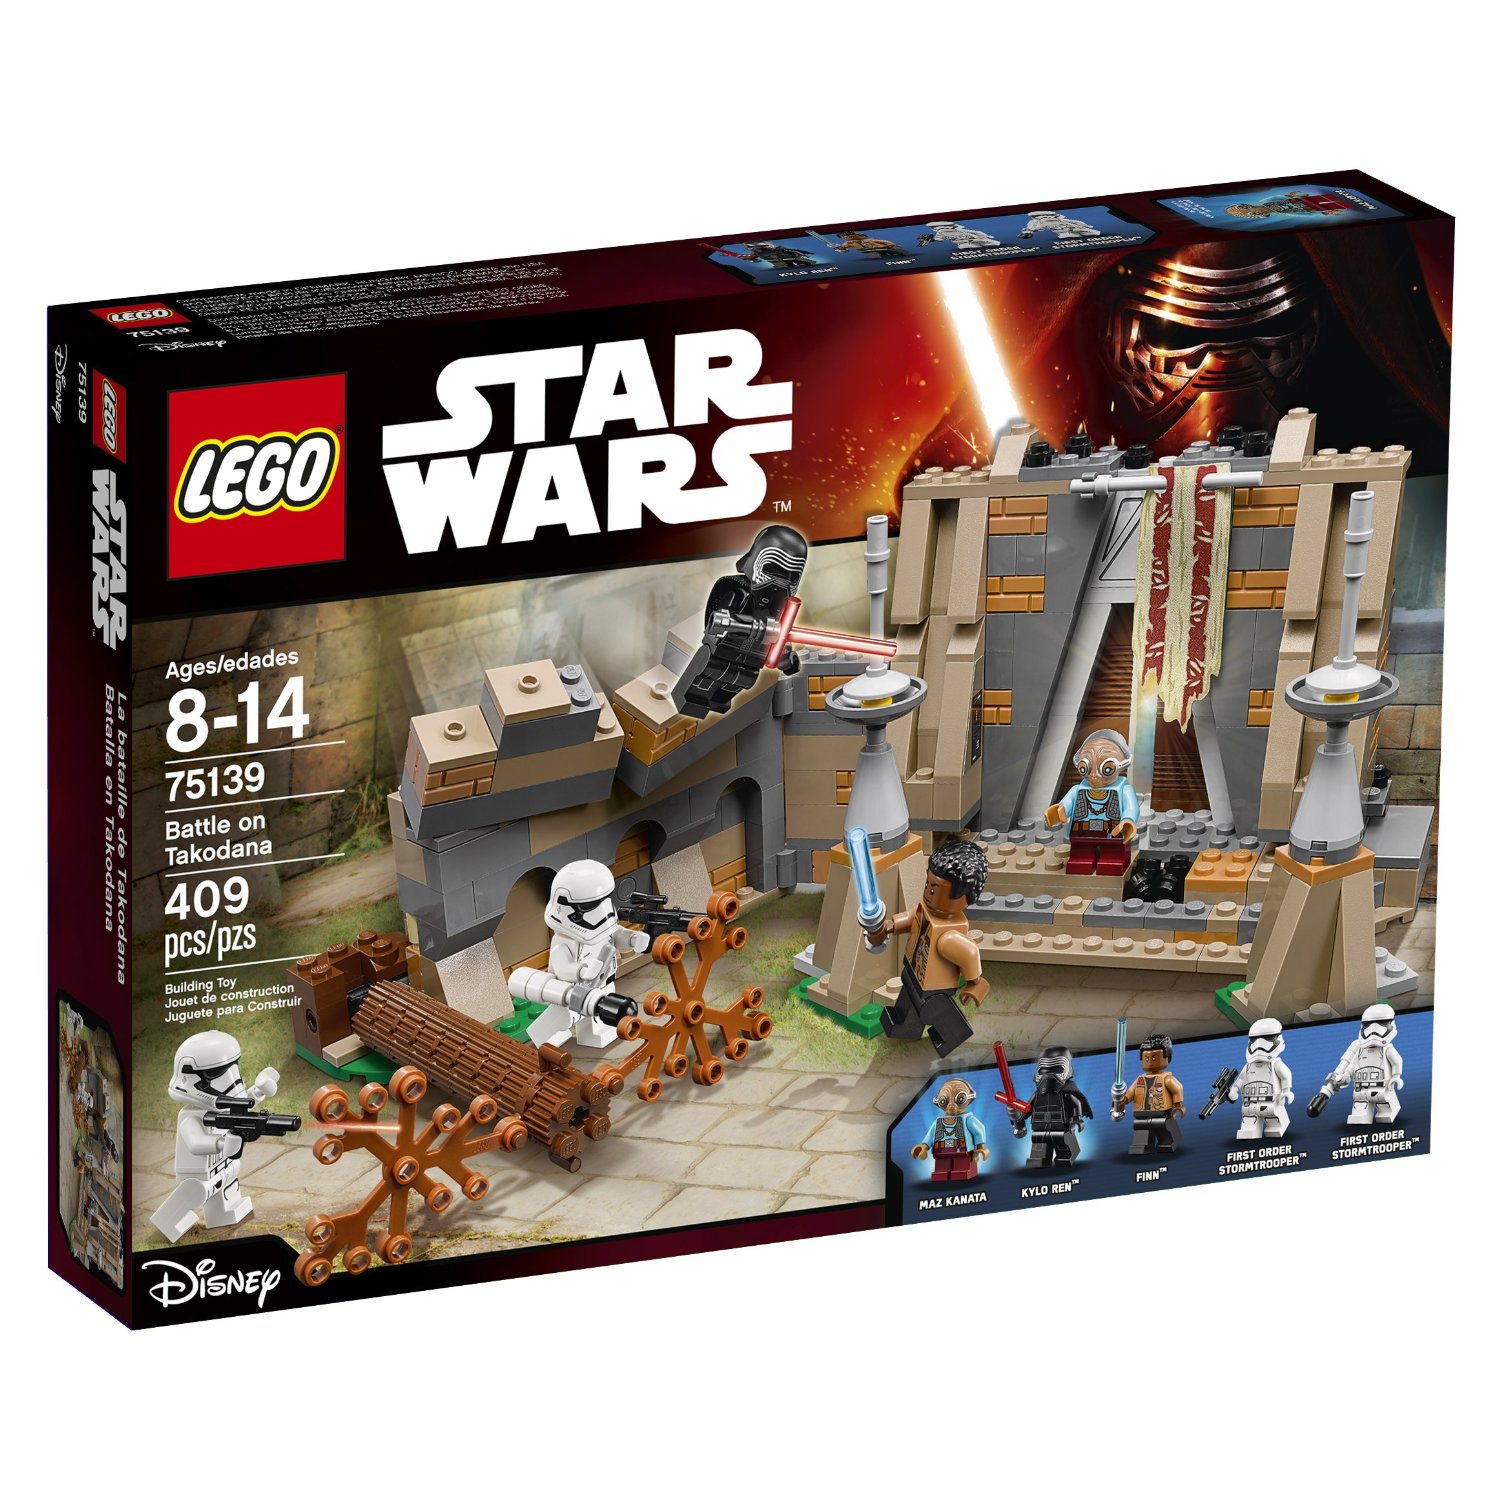 New LEGO Star Wars sets - The Force Awakens